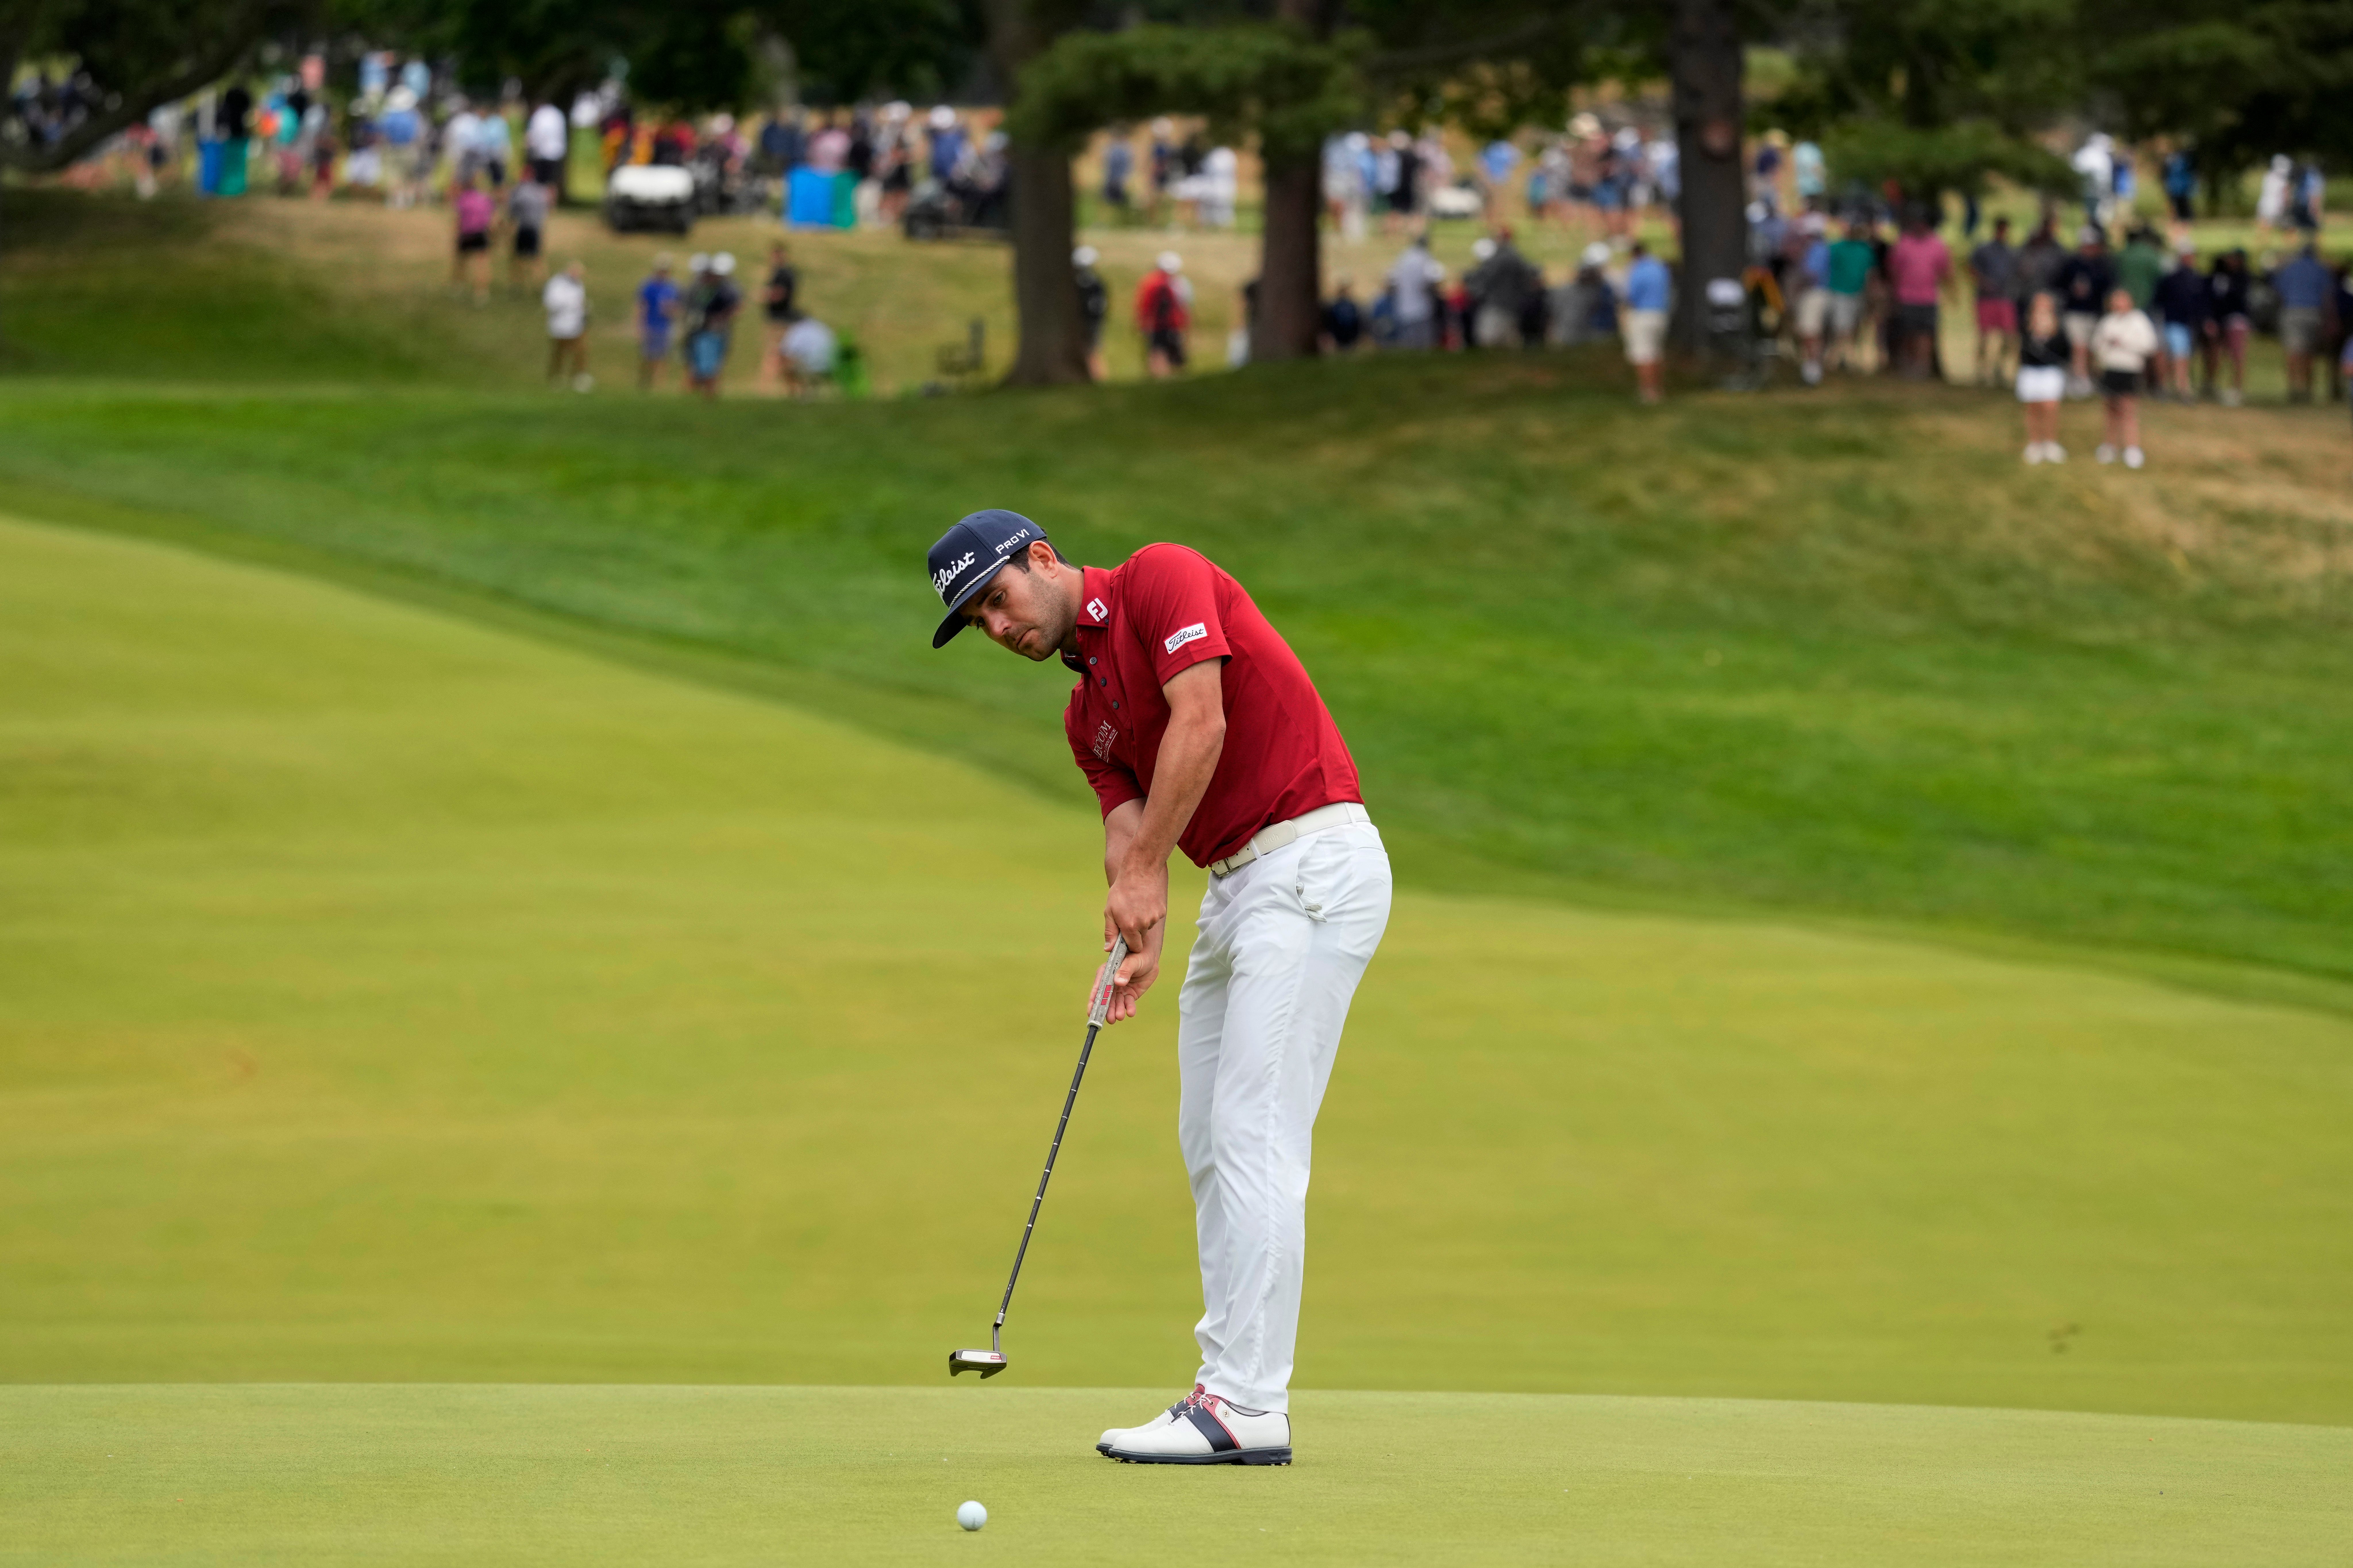 Callum Tarren putts on the ninth hole during the first round of the US Open (Charlie Riedel/AP)